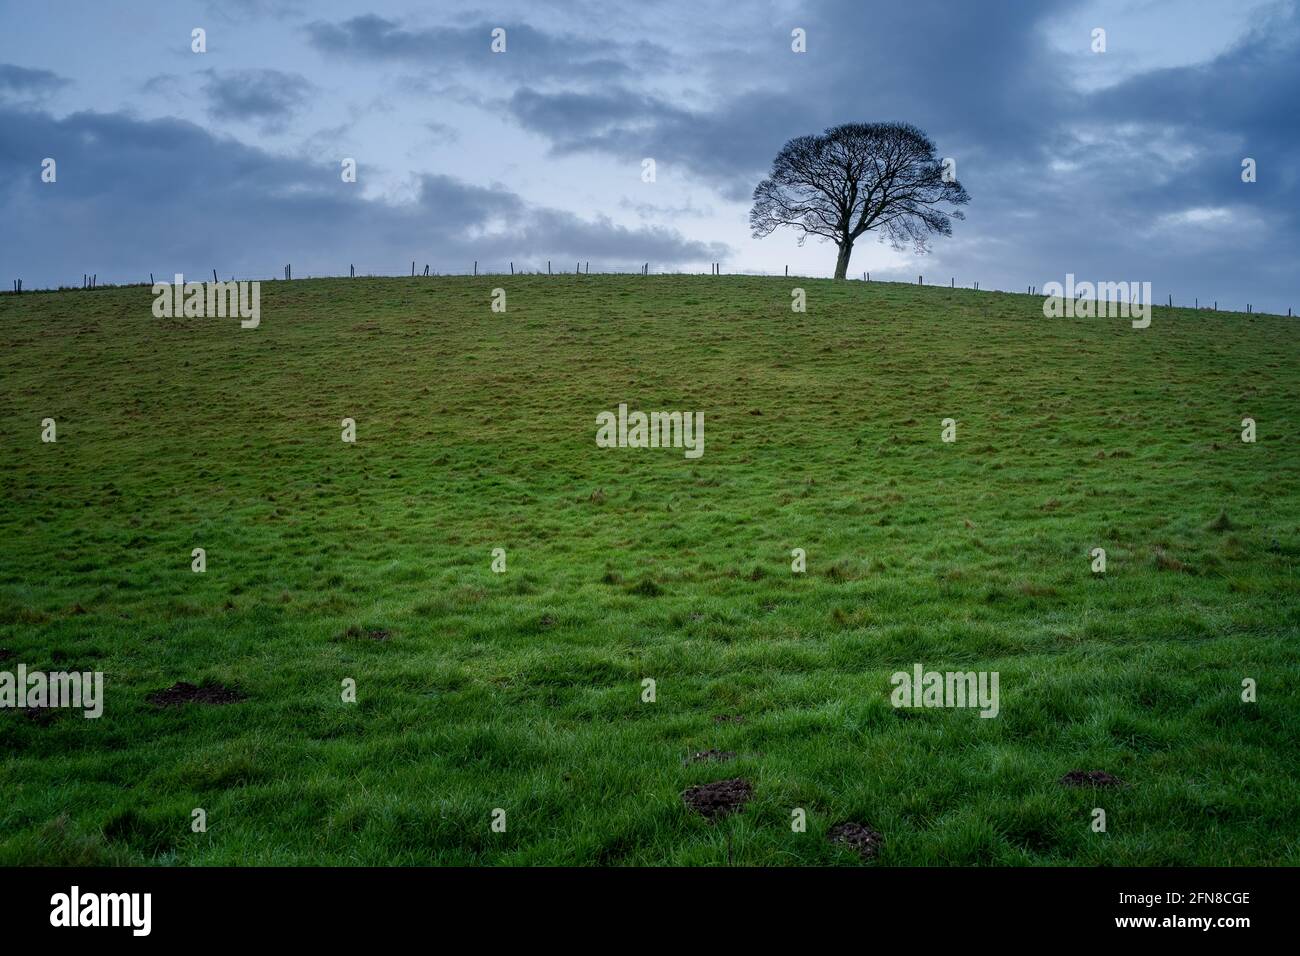 Lonely tree on grass field Stock Photo